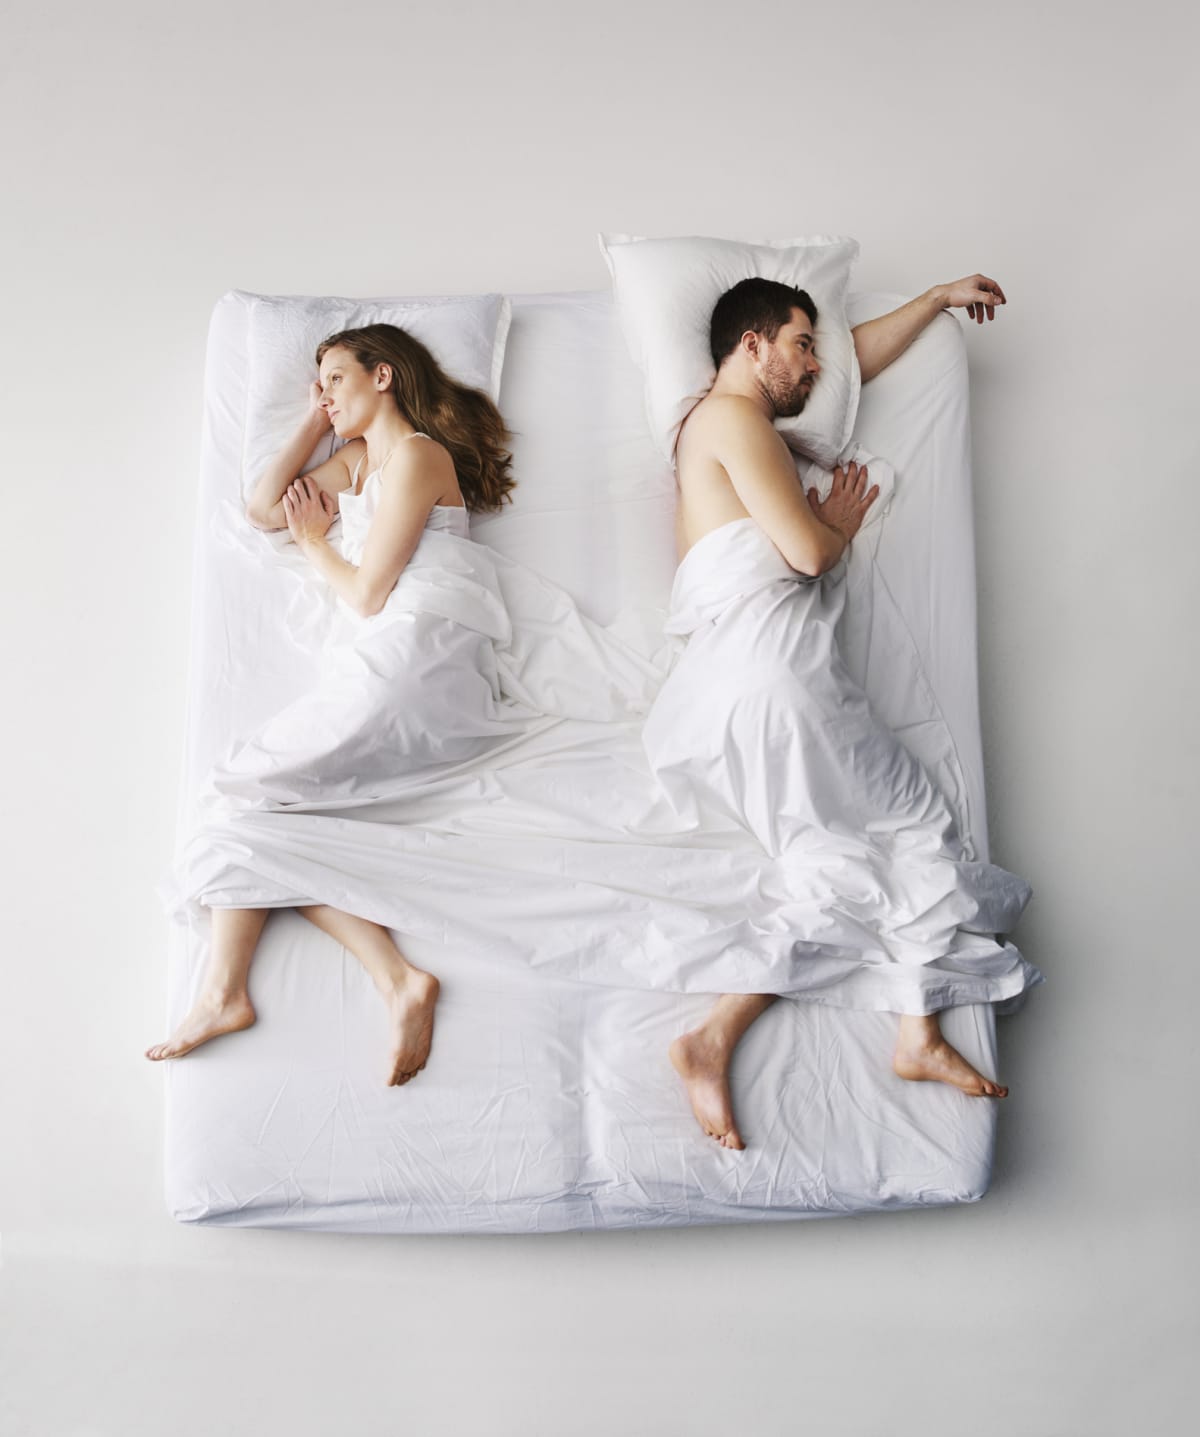 Adult couple laying in bed, elevated view